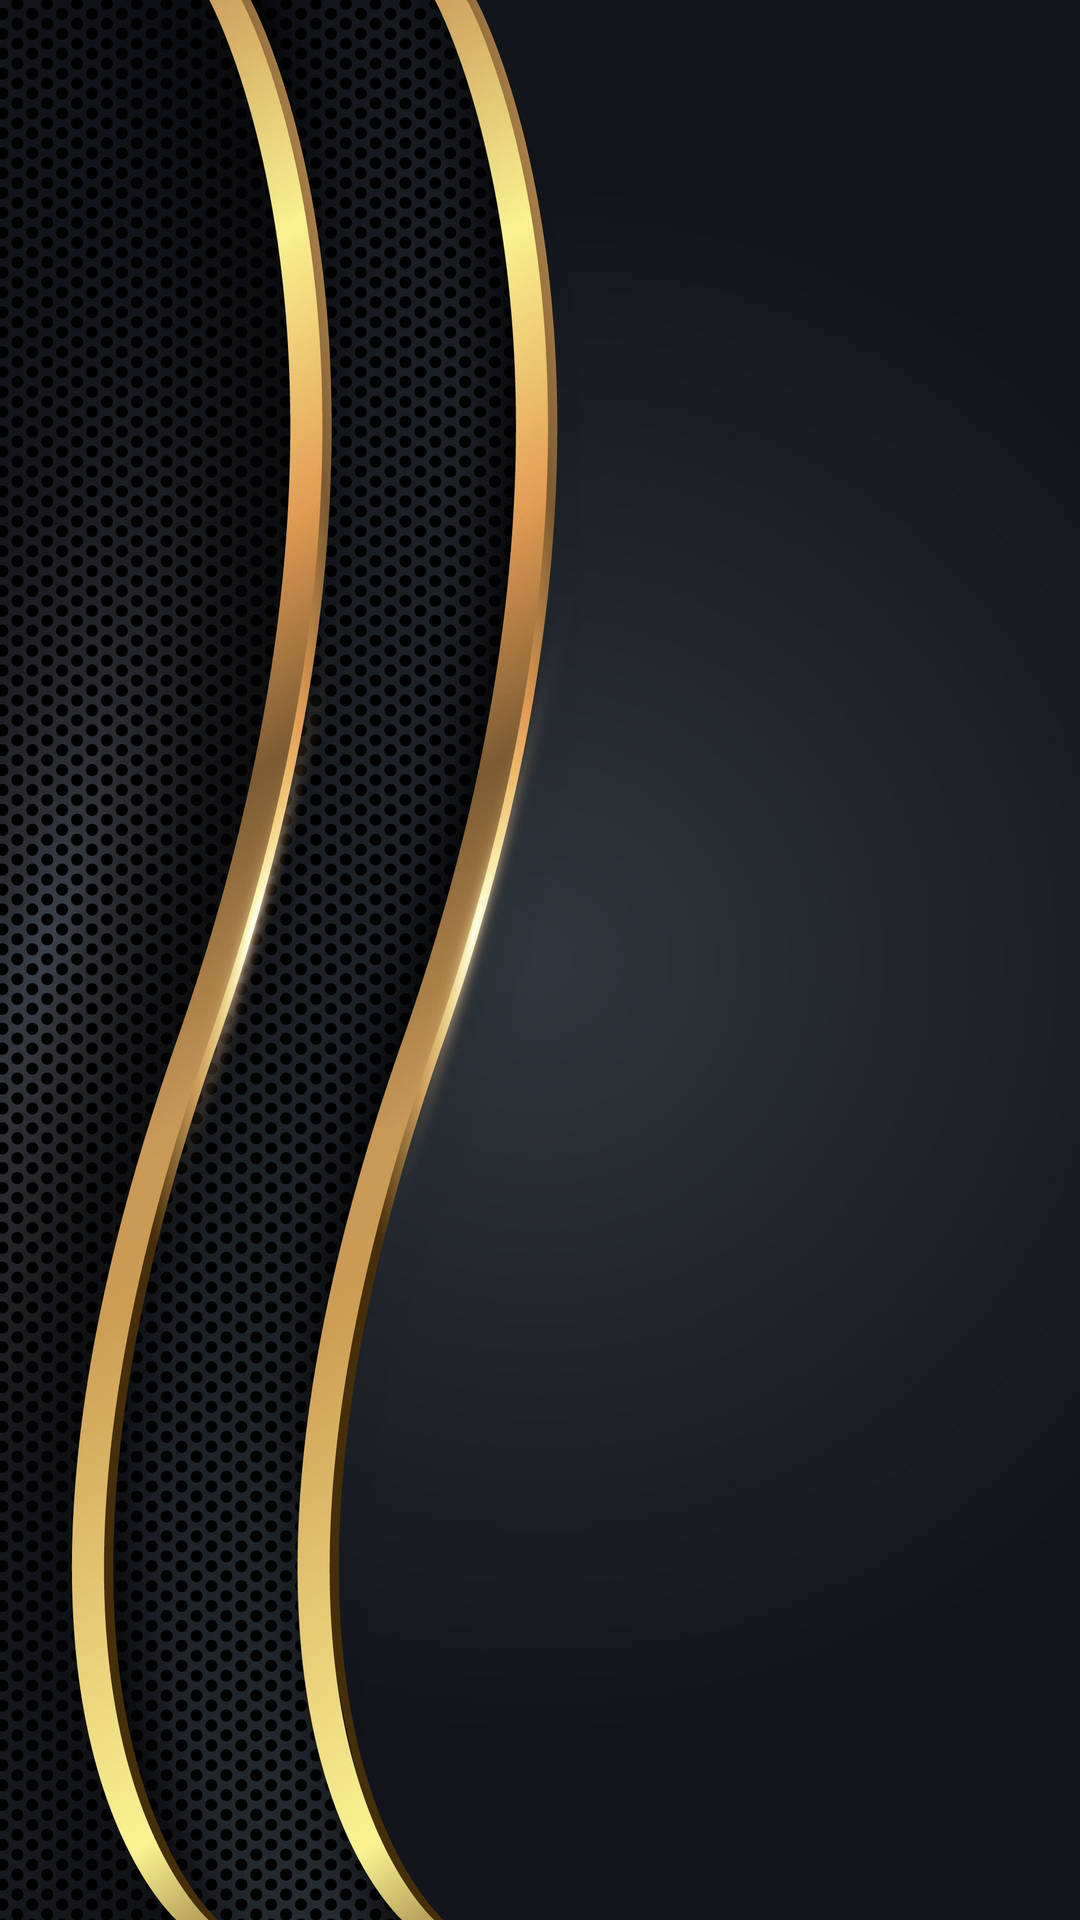 iPhone 12 Pro Max Gold Aesthetic Curved Lines Wallpaper